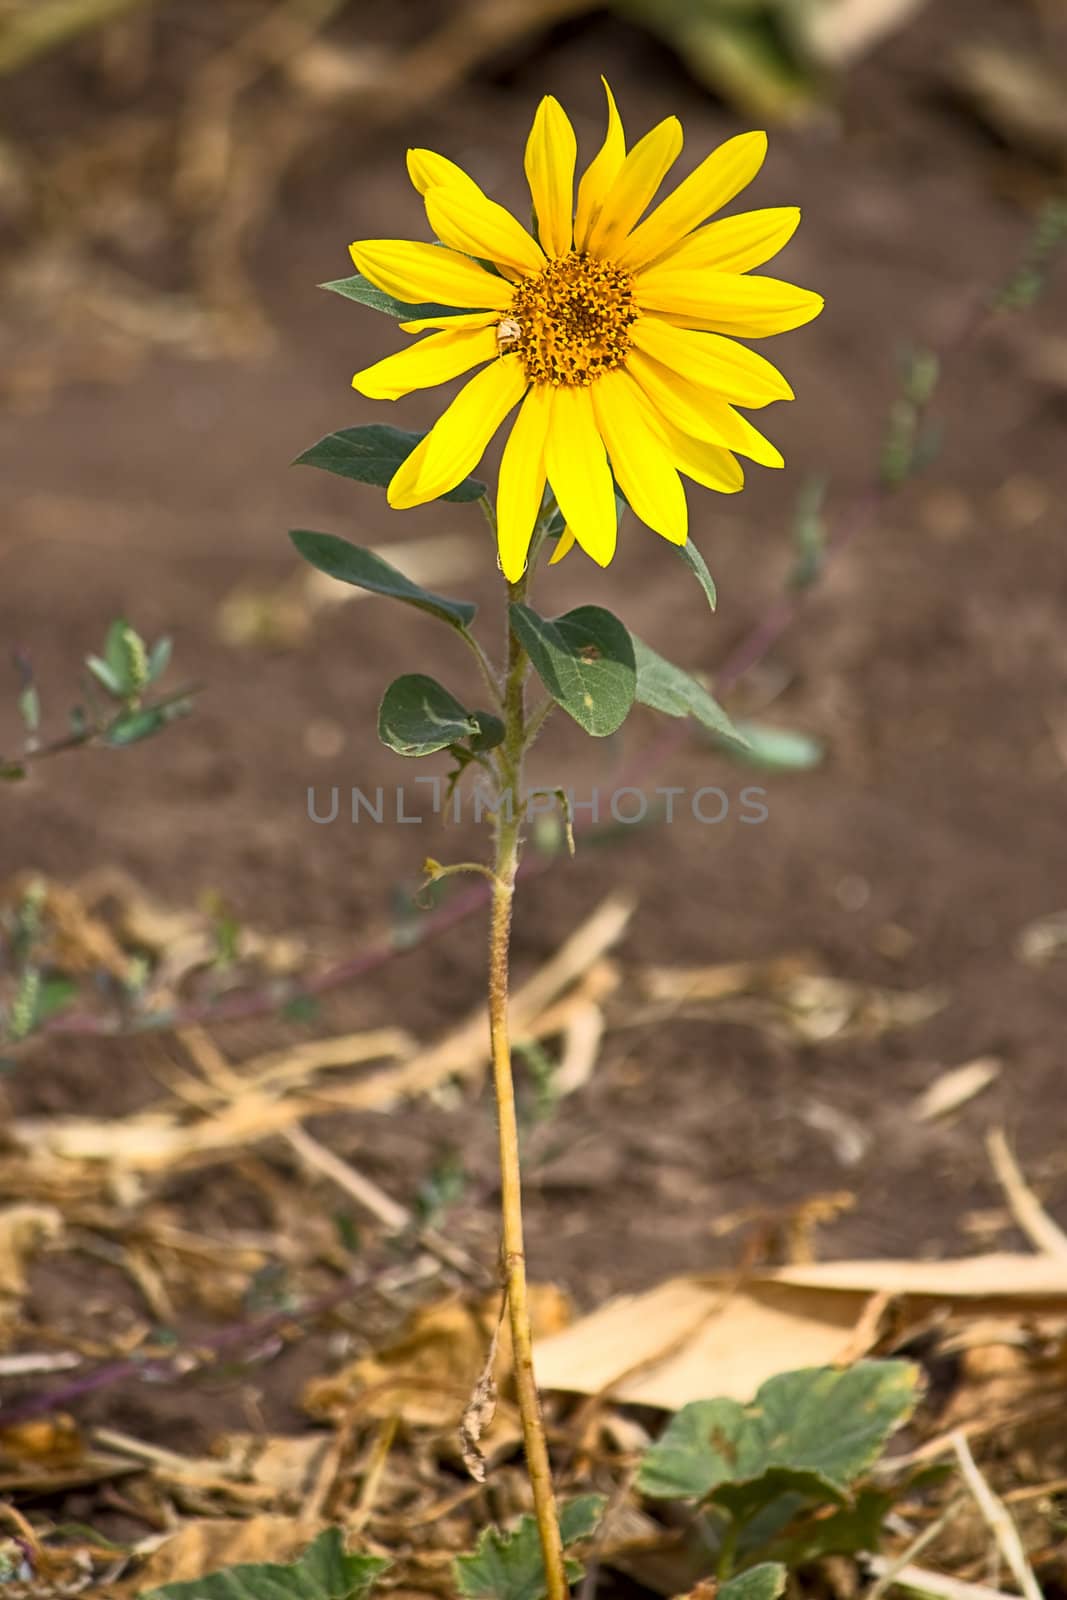 Single flower sunflower against a dark background.An image with shallow depth of field.